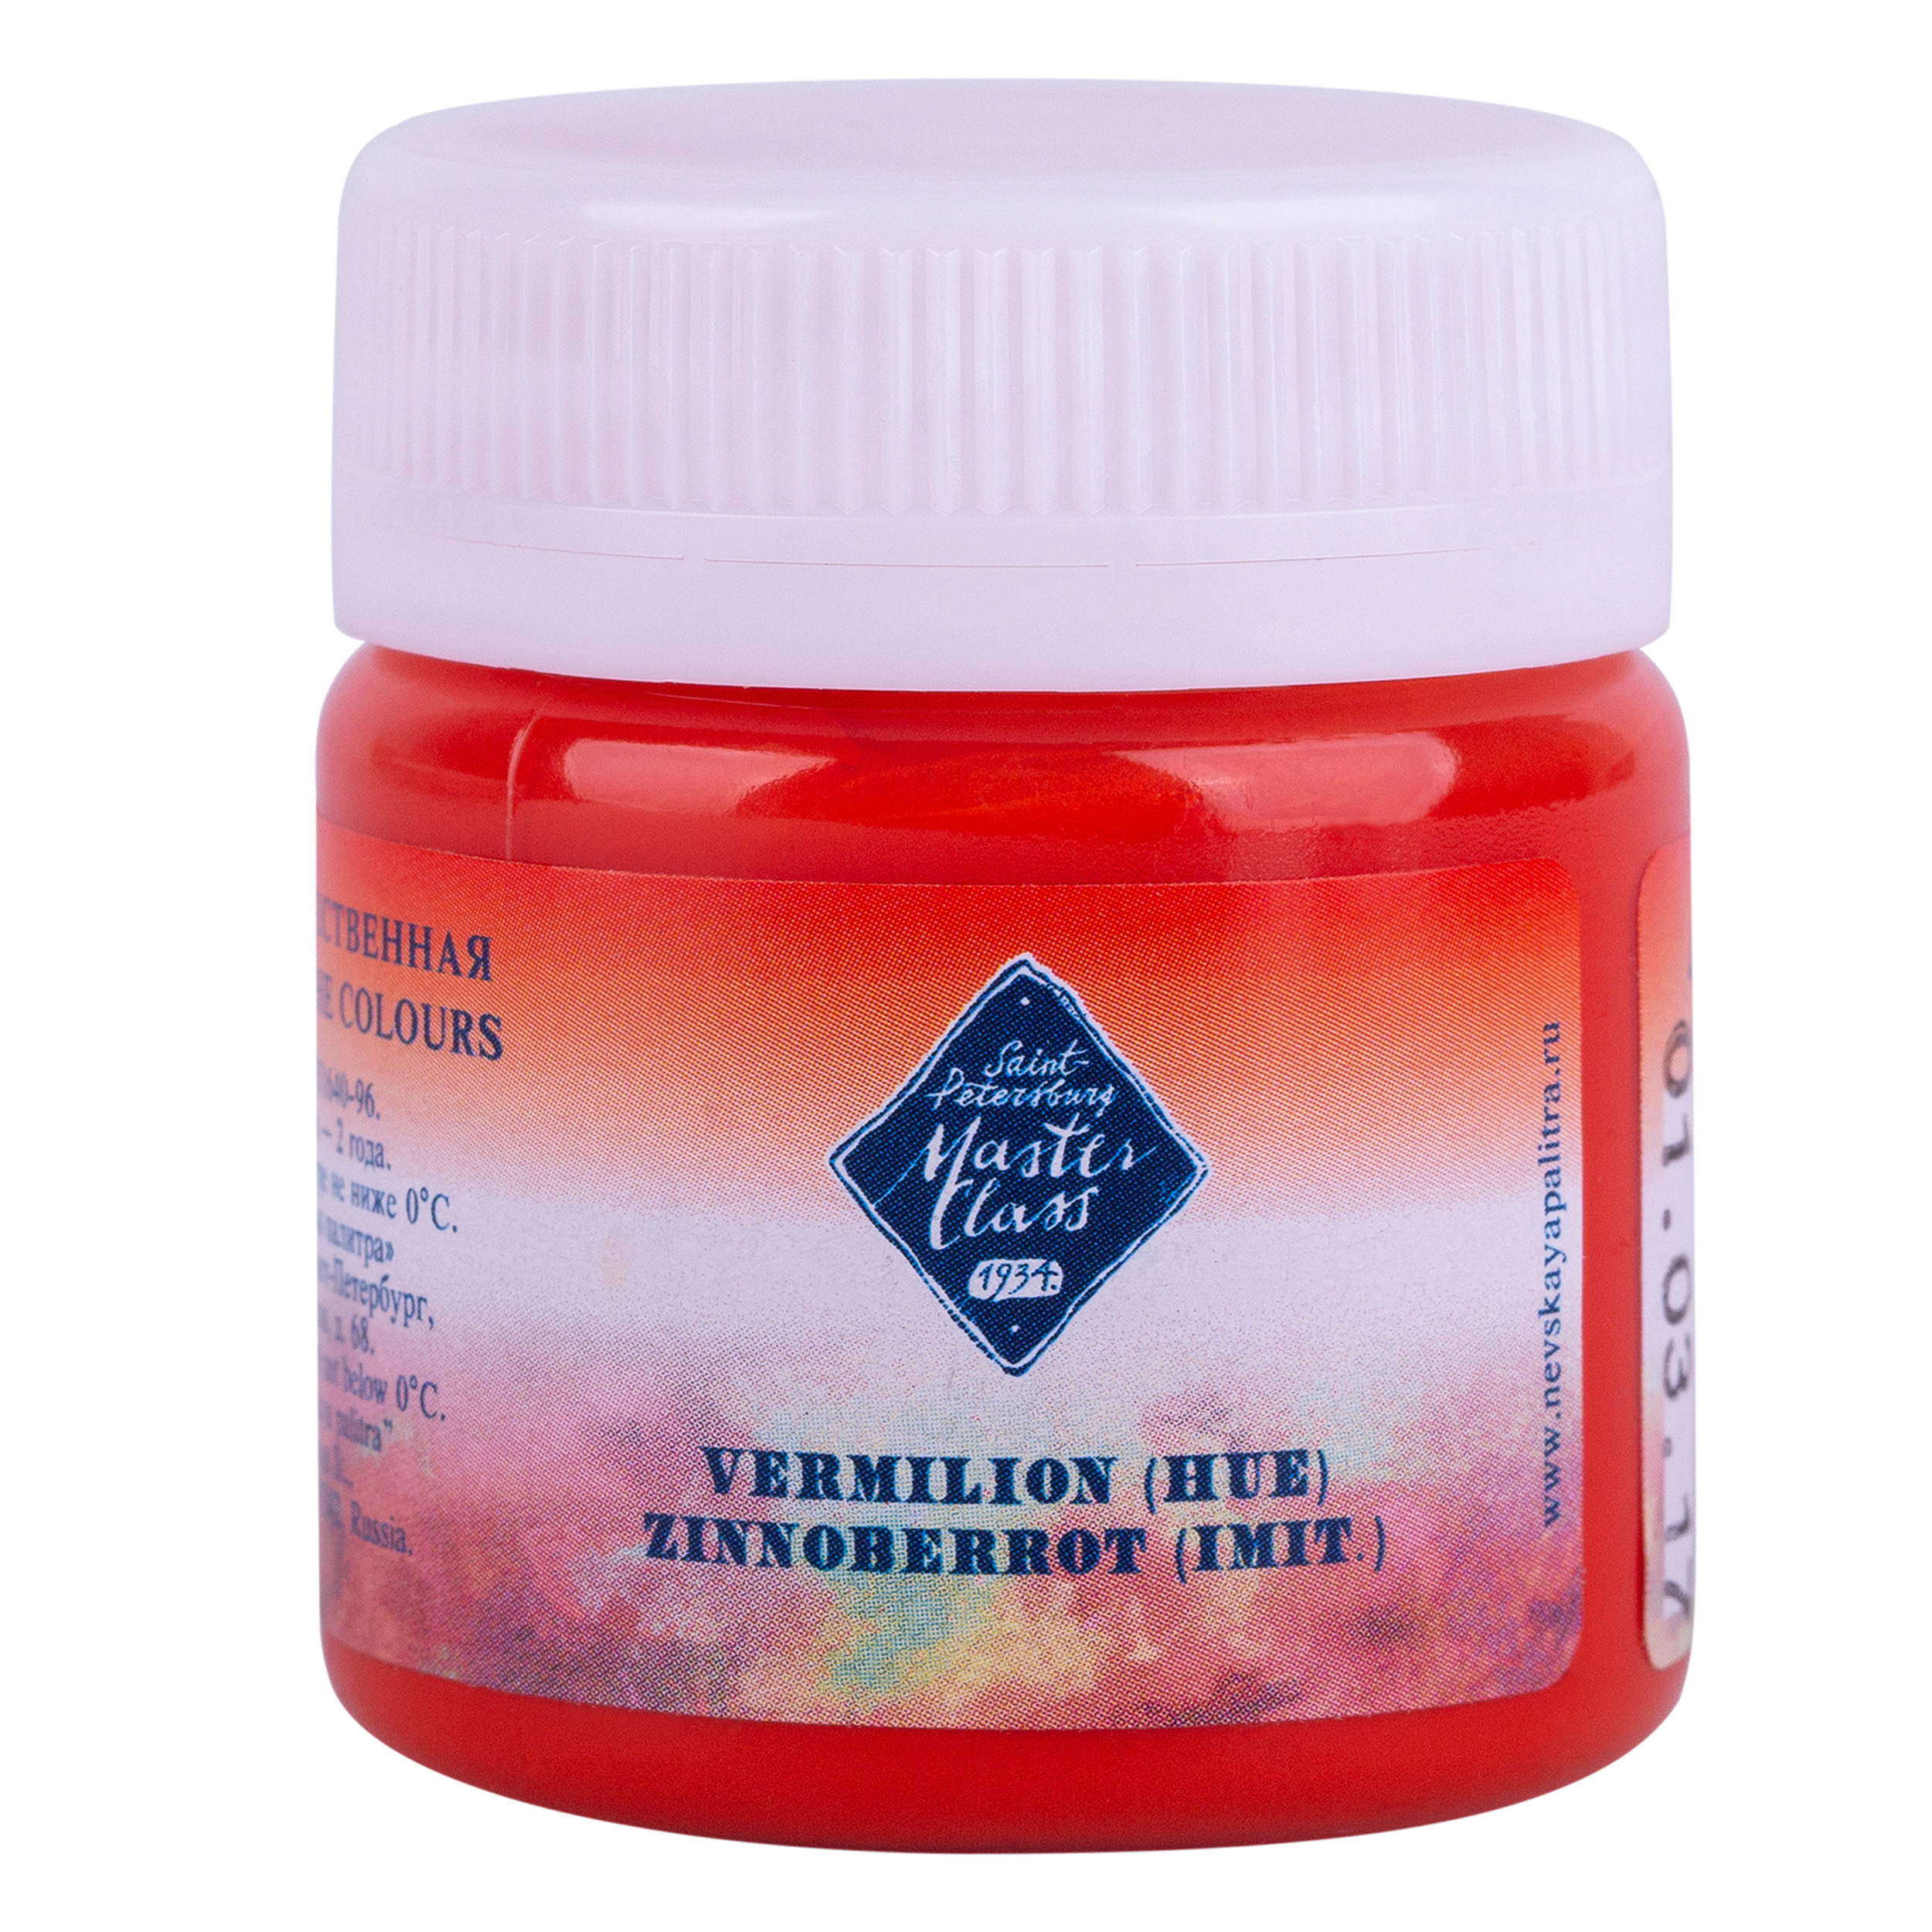 Vermilion (HUE) "Master Class" in the jar. № 312